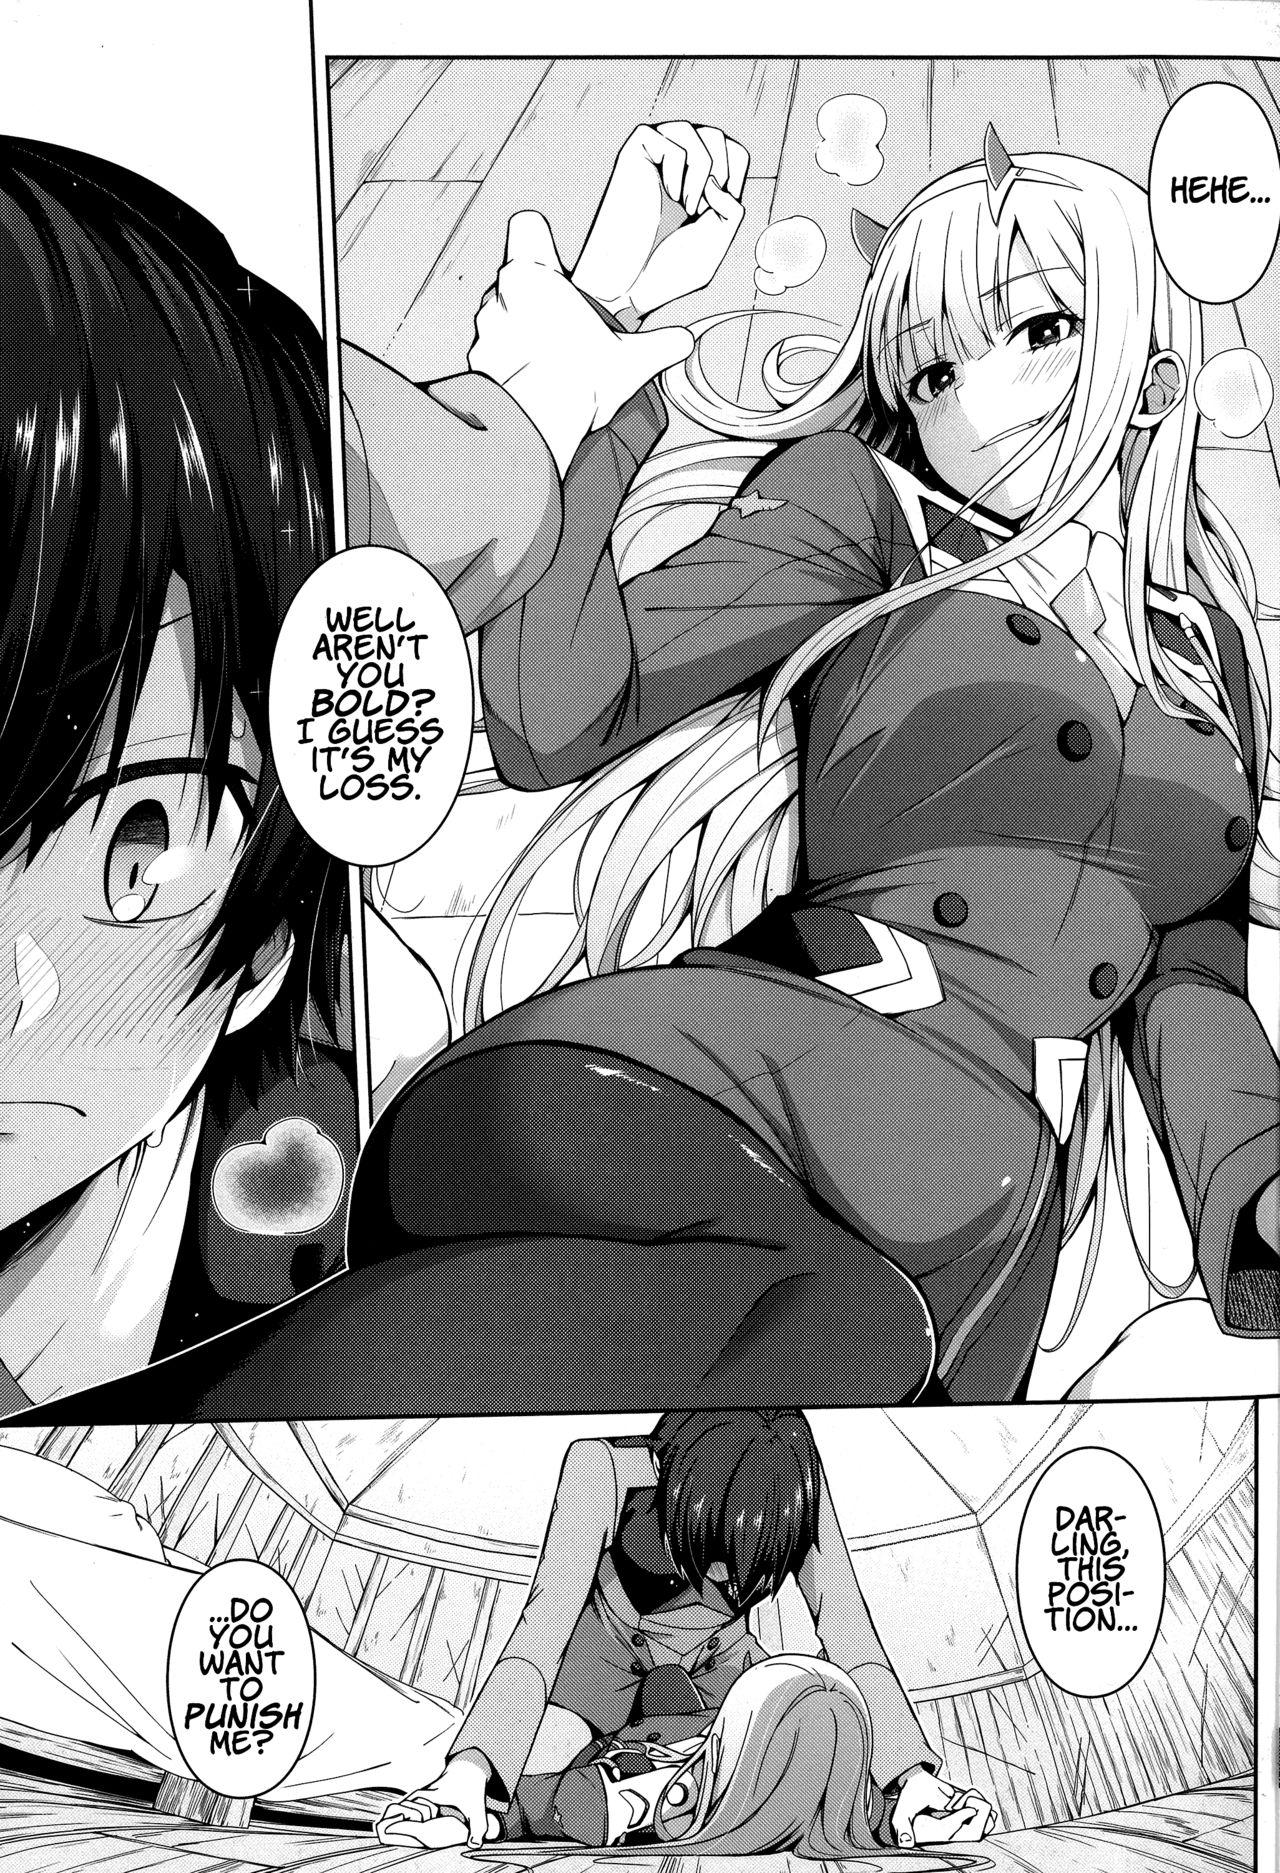 Uncut Forbidden Connection - Darling in the franxx Perfect Girl Porn - Page 4